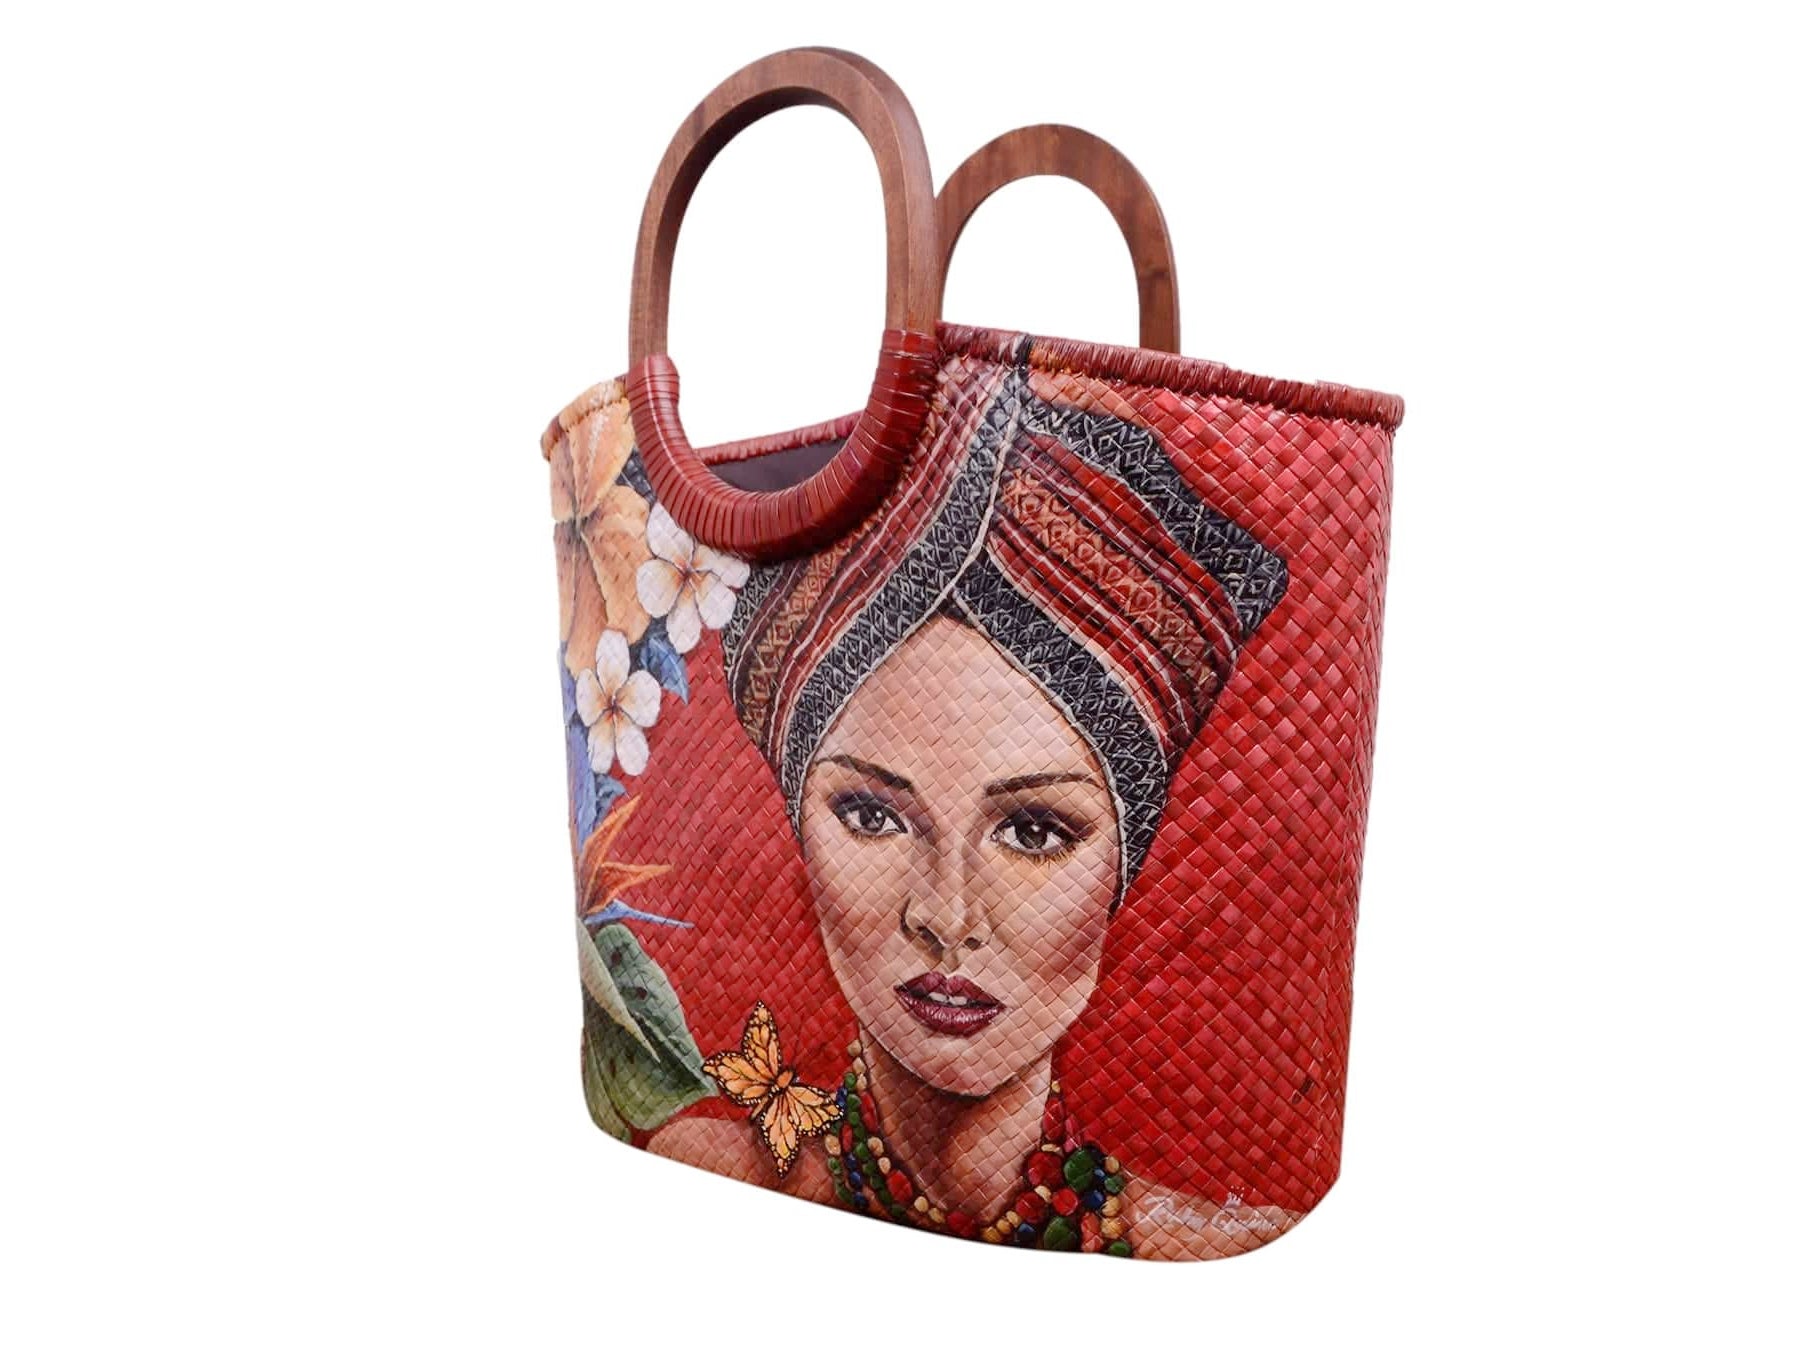 Artistic Hand-Painted Red Bag for a Unique Look Painting by